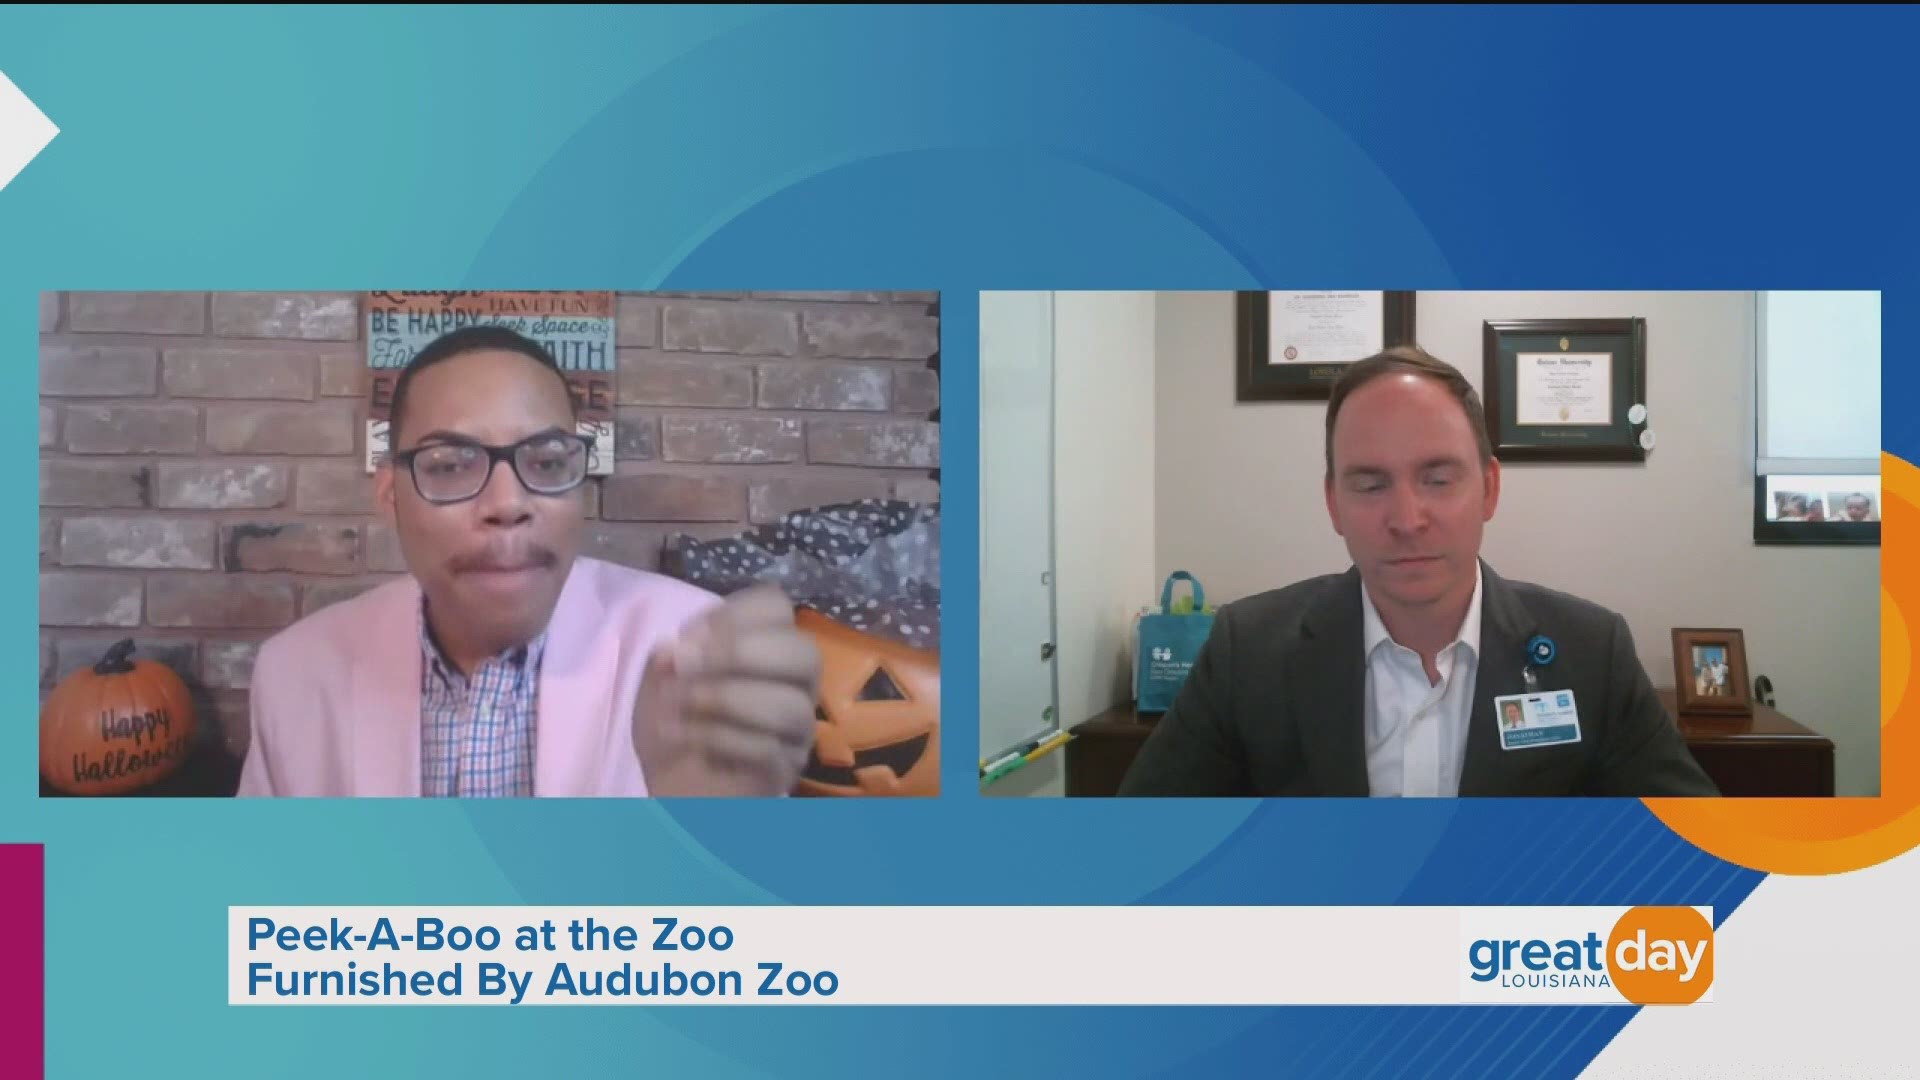 The Children's Hospital New Orleans discussed the upcoming event, "Peek-A-Boo At The Zoo," on October 24 & 25 at The Audubon Zoo.